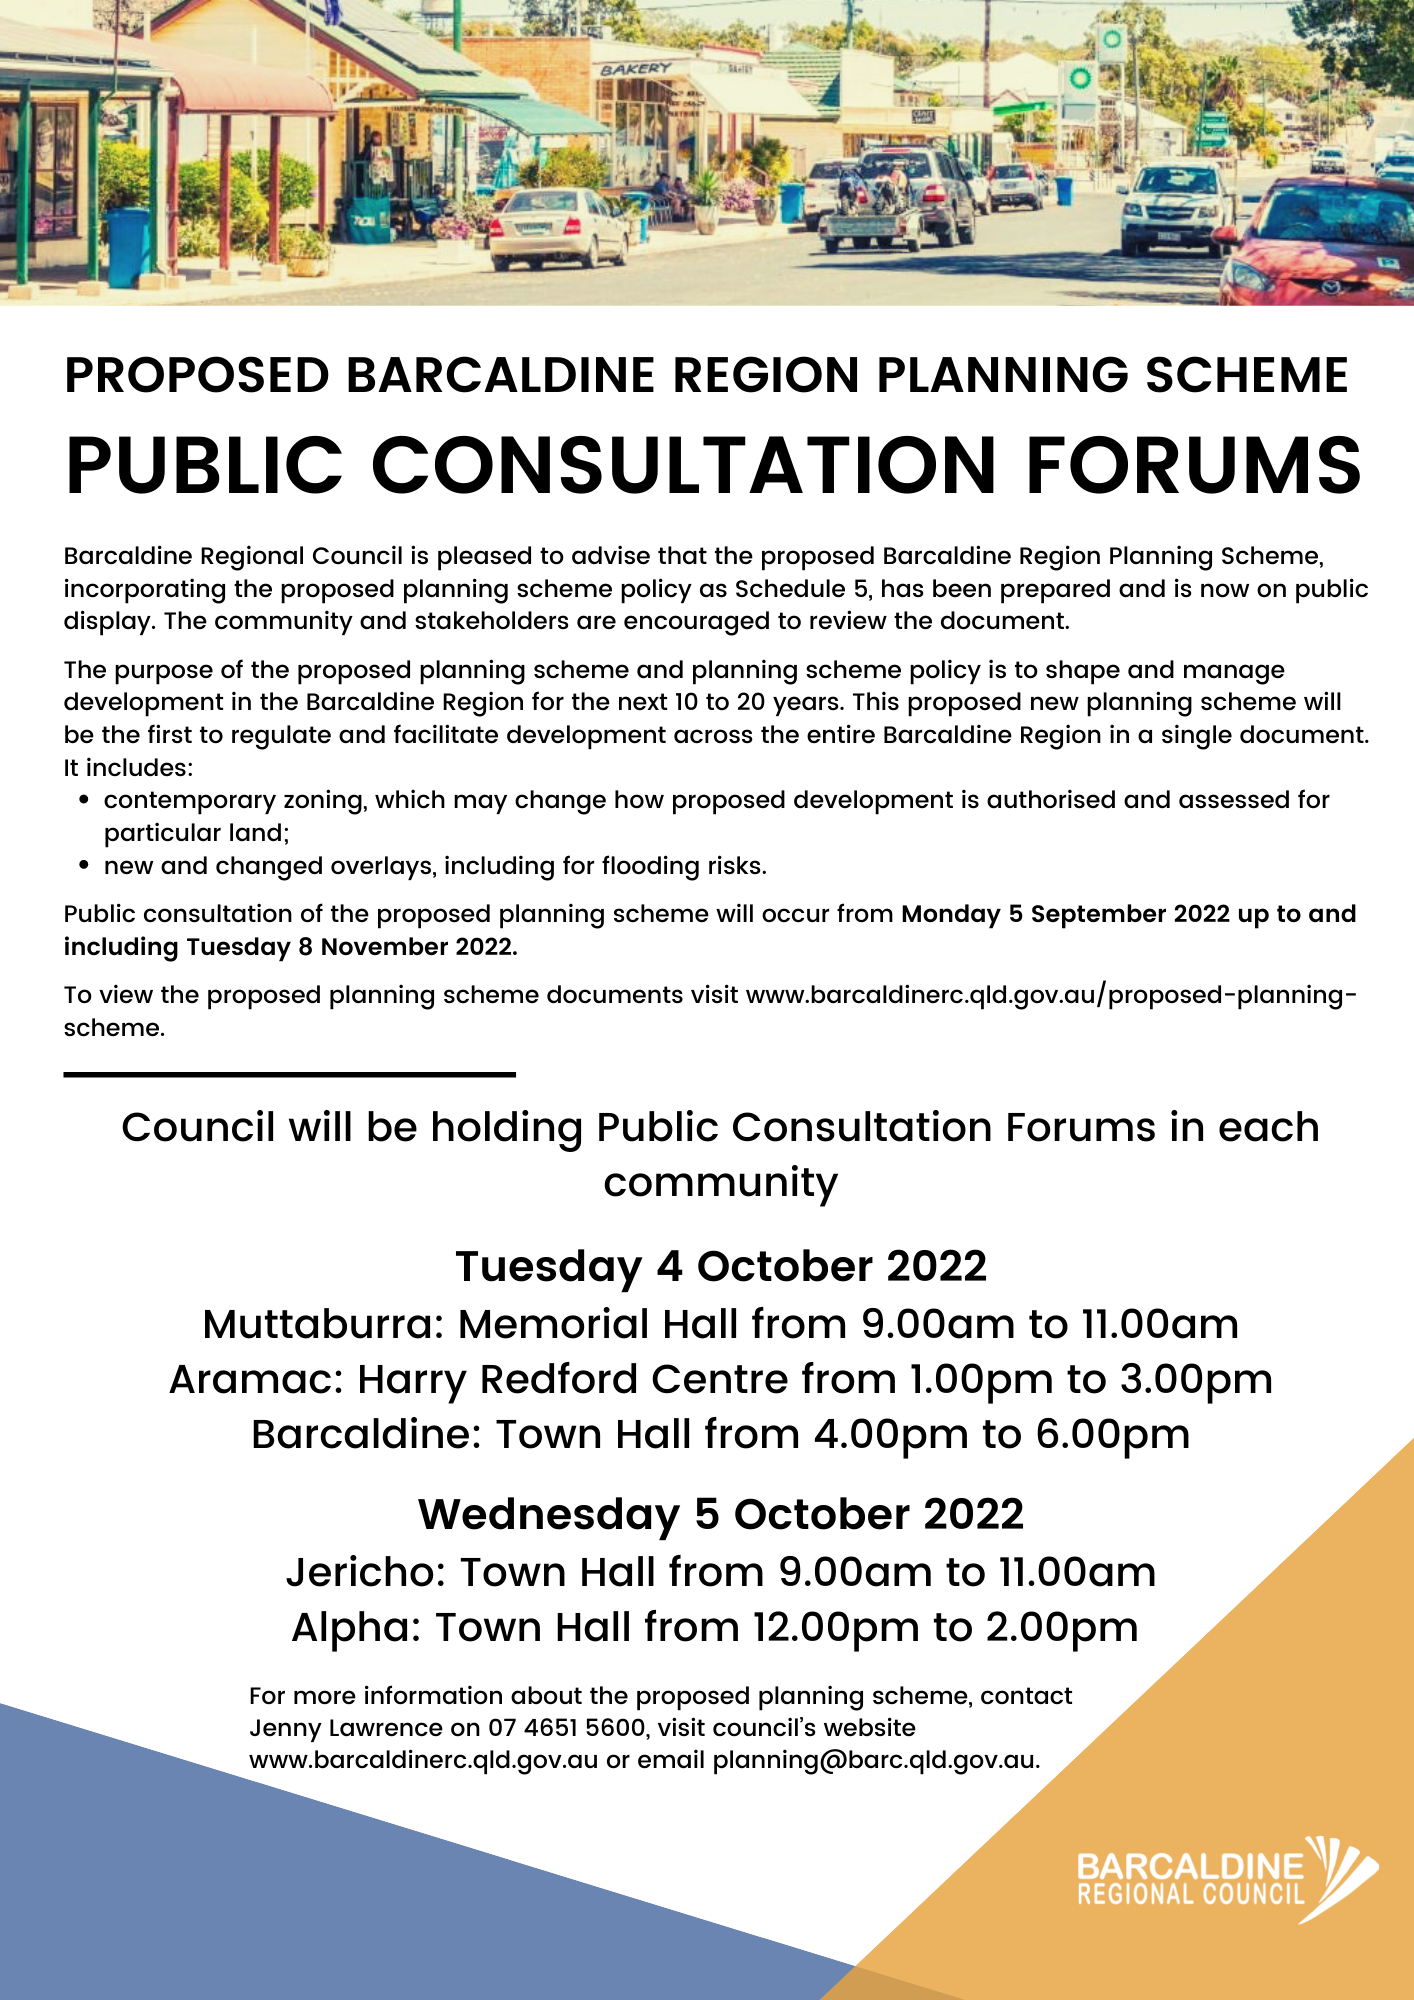 Barcaldine Regional Council - Proposed Barcaldine Region Planning Scheme Public Consultation Forums, Tuesday 4 and Wednesday 5 October 2022